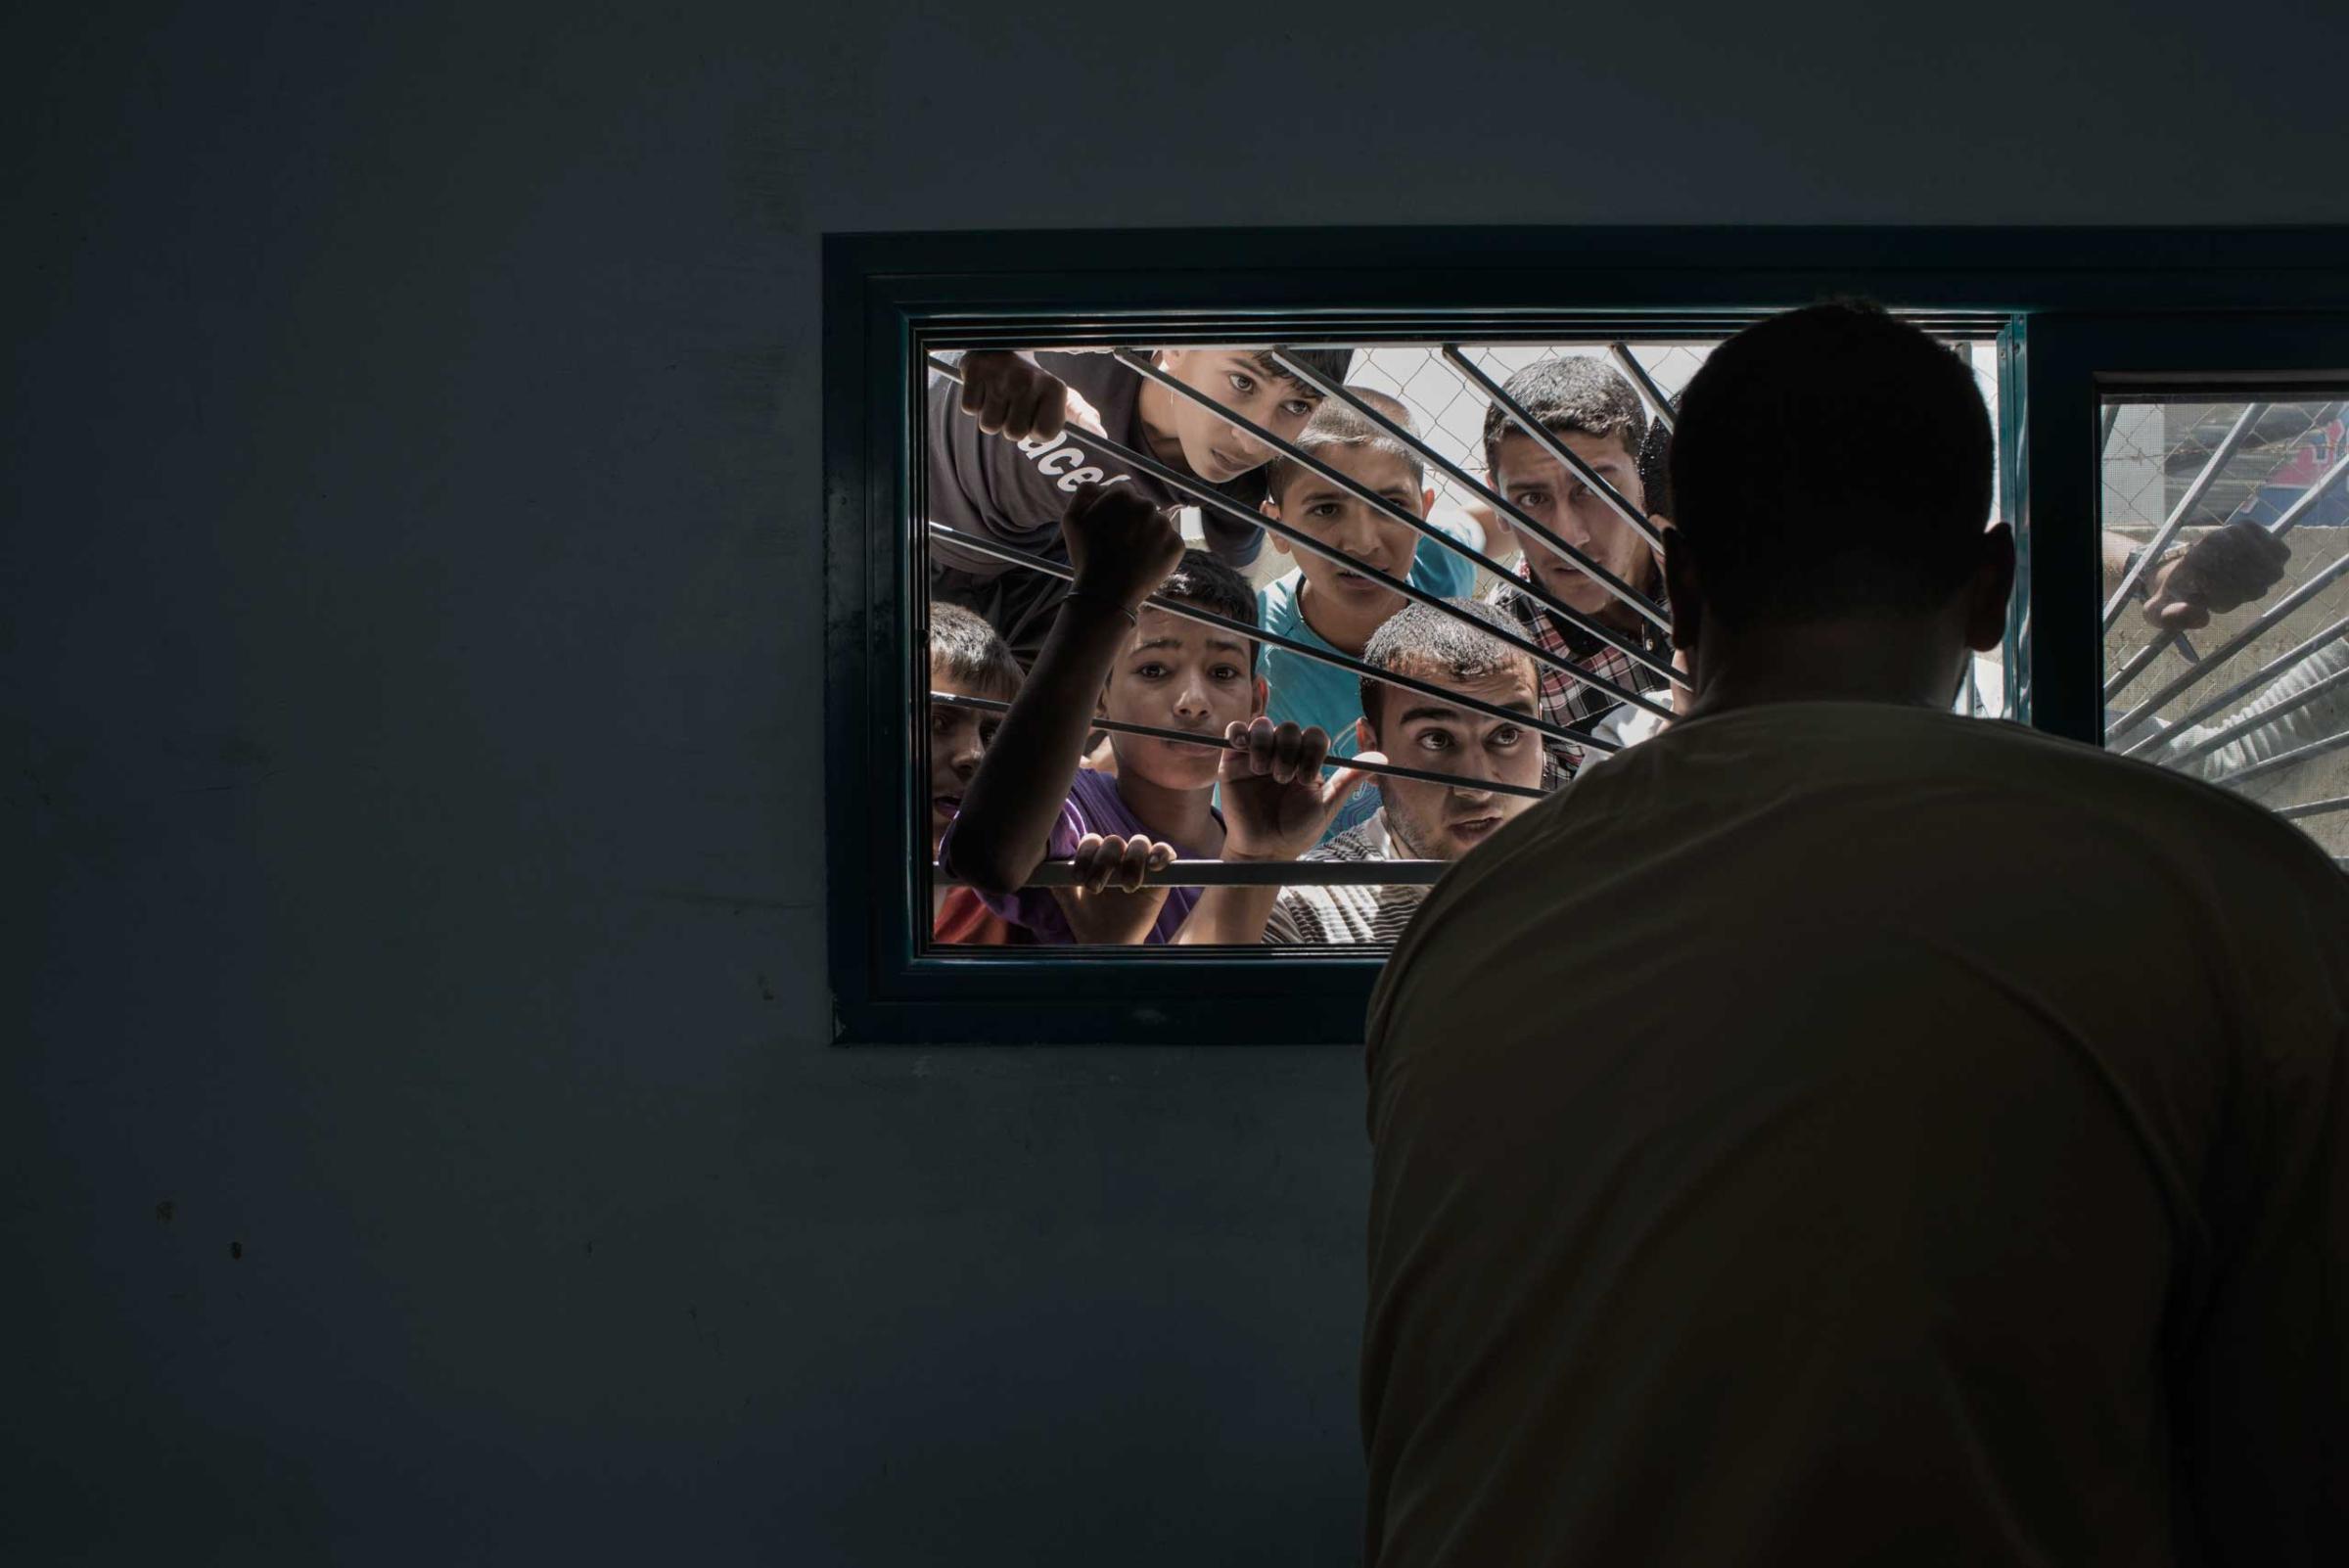 People looking through the window of the Beit Hanoun morgue, in the Gaza Strip, July 9, 2014.